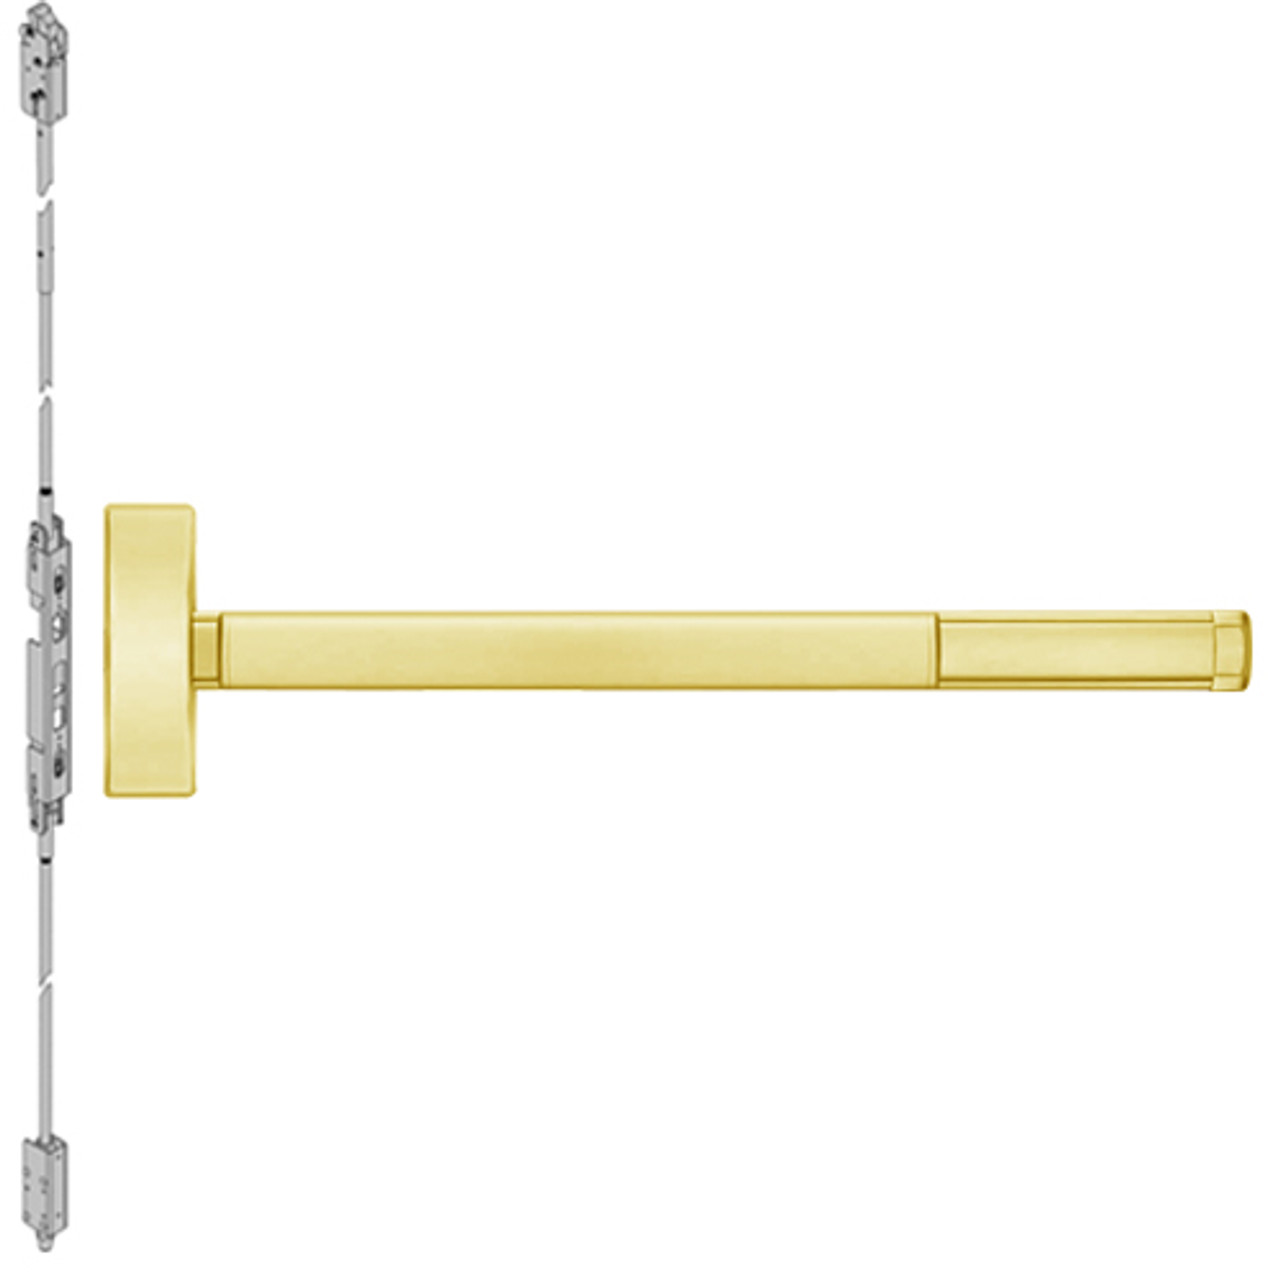 ELR2808-605-48 PHI 2800 Series Concealed Vertical Rod Exit Device with Electric Latch Retraction Prepped for Key Controls Lever-Knob in Bright Brass Finish